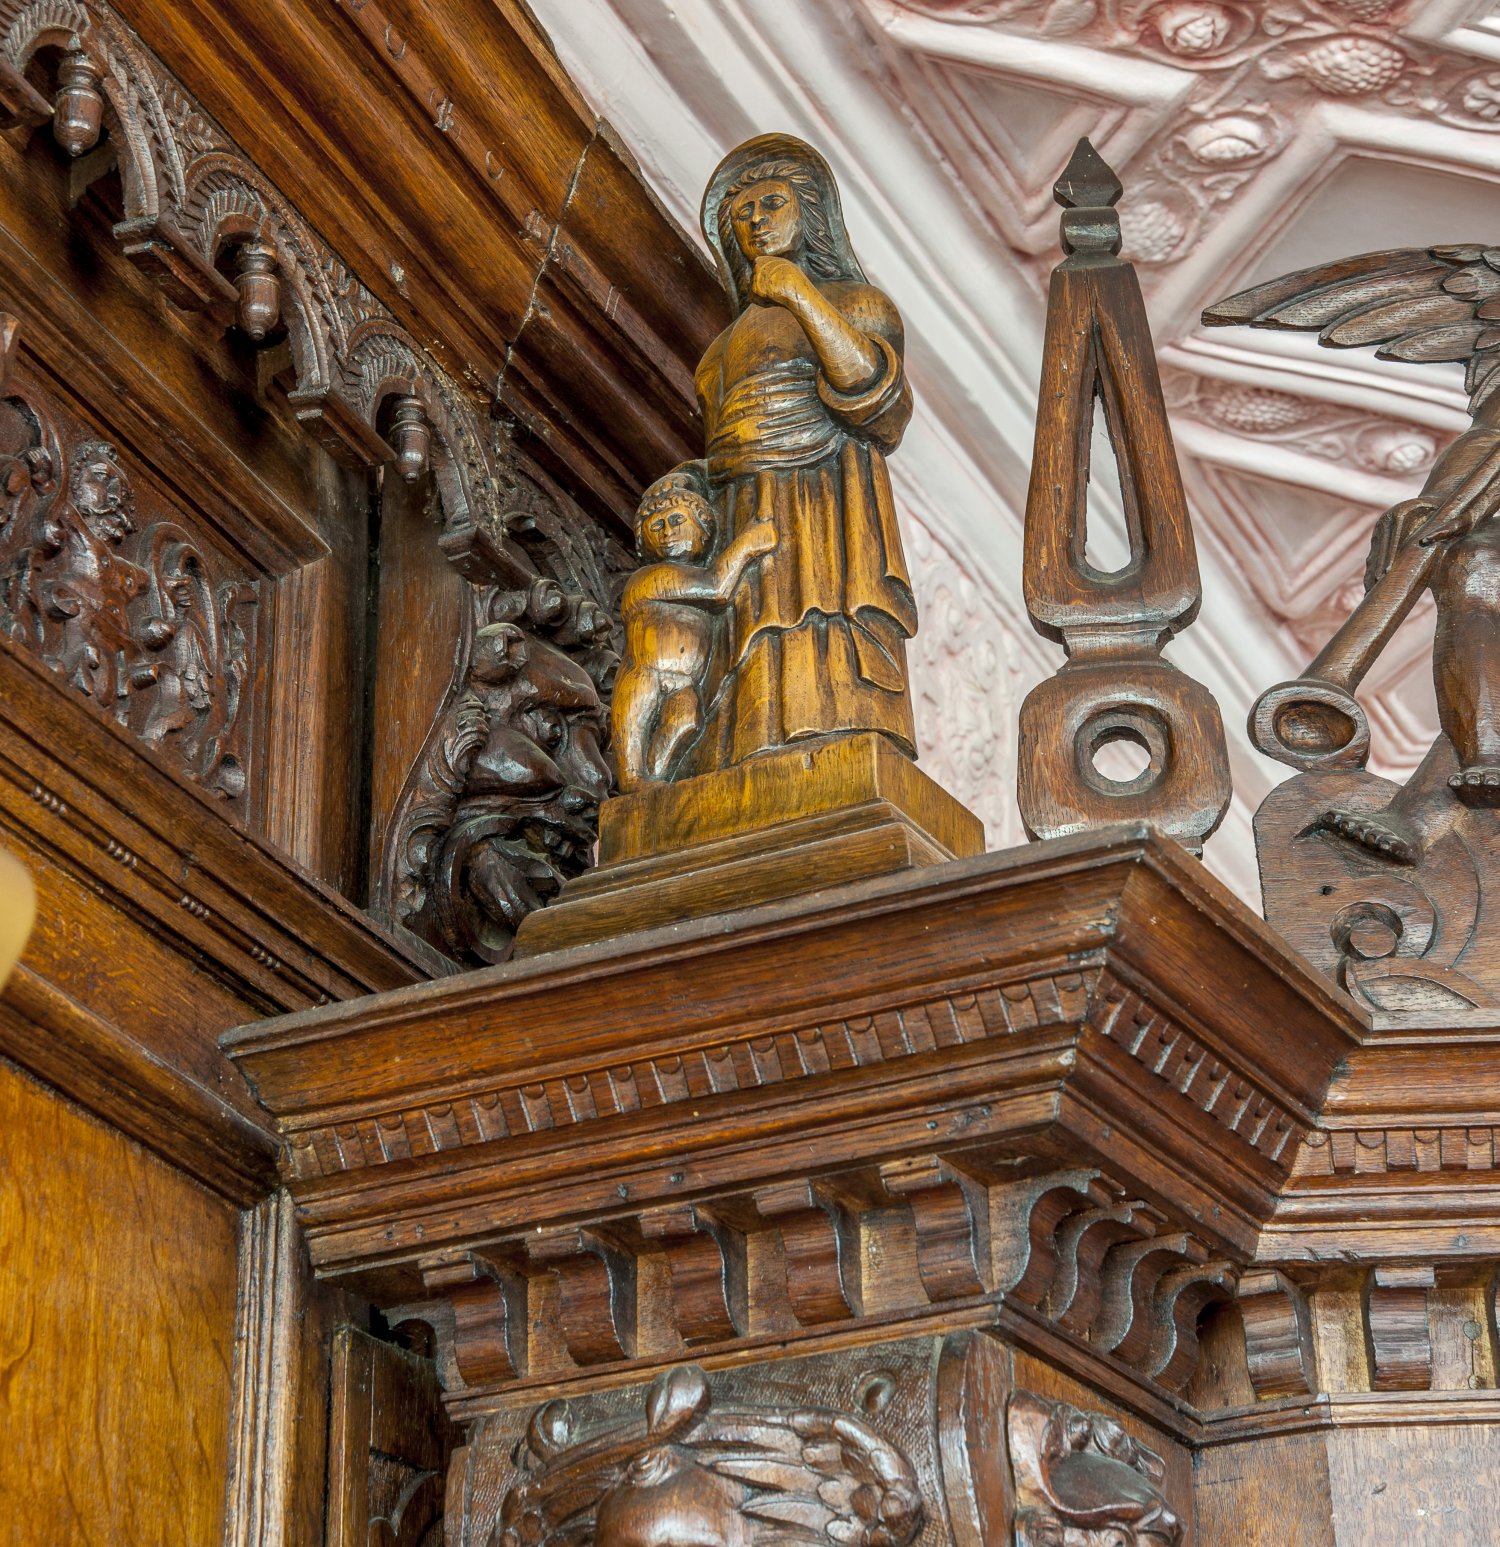 Replacement carved statues in the late C16th Job Room